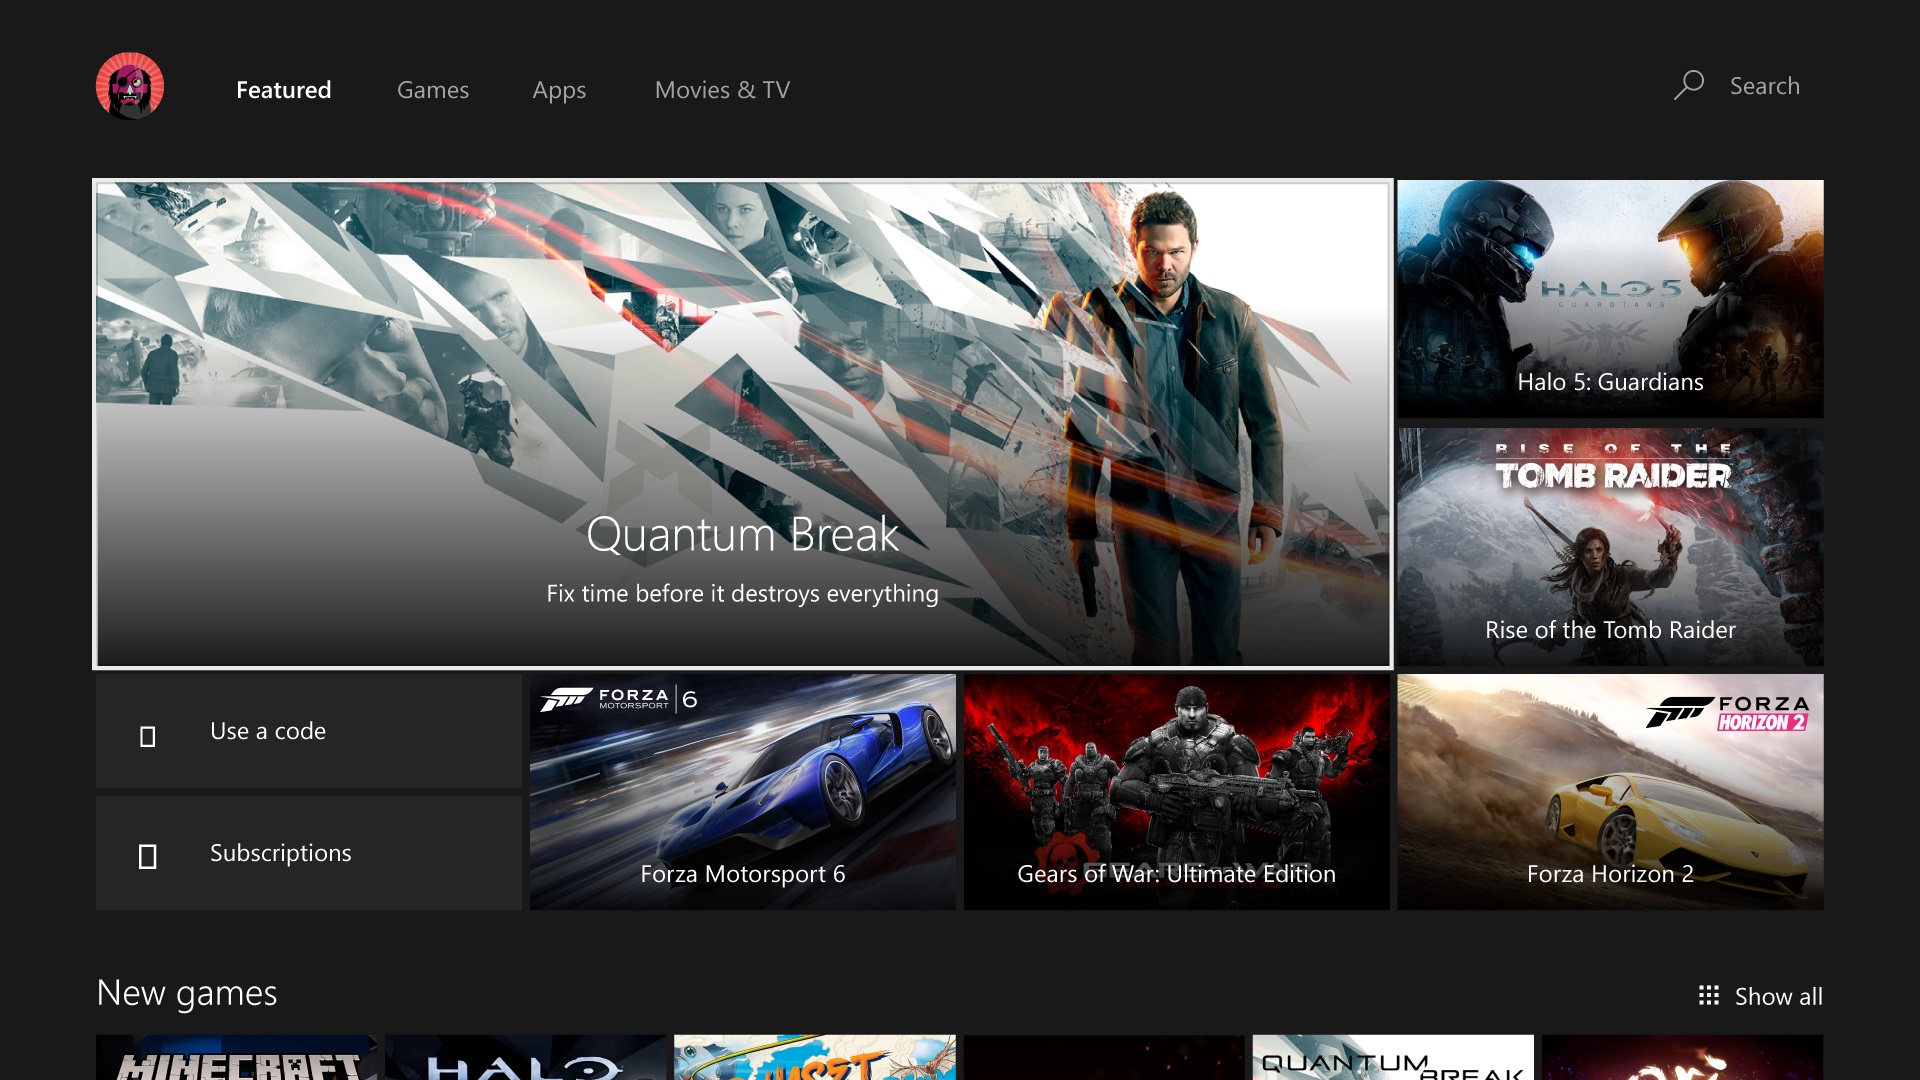 New Content, Cortana Integration and More Coming in the Xbox Summer Update